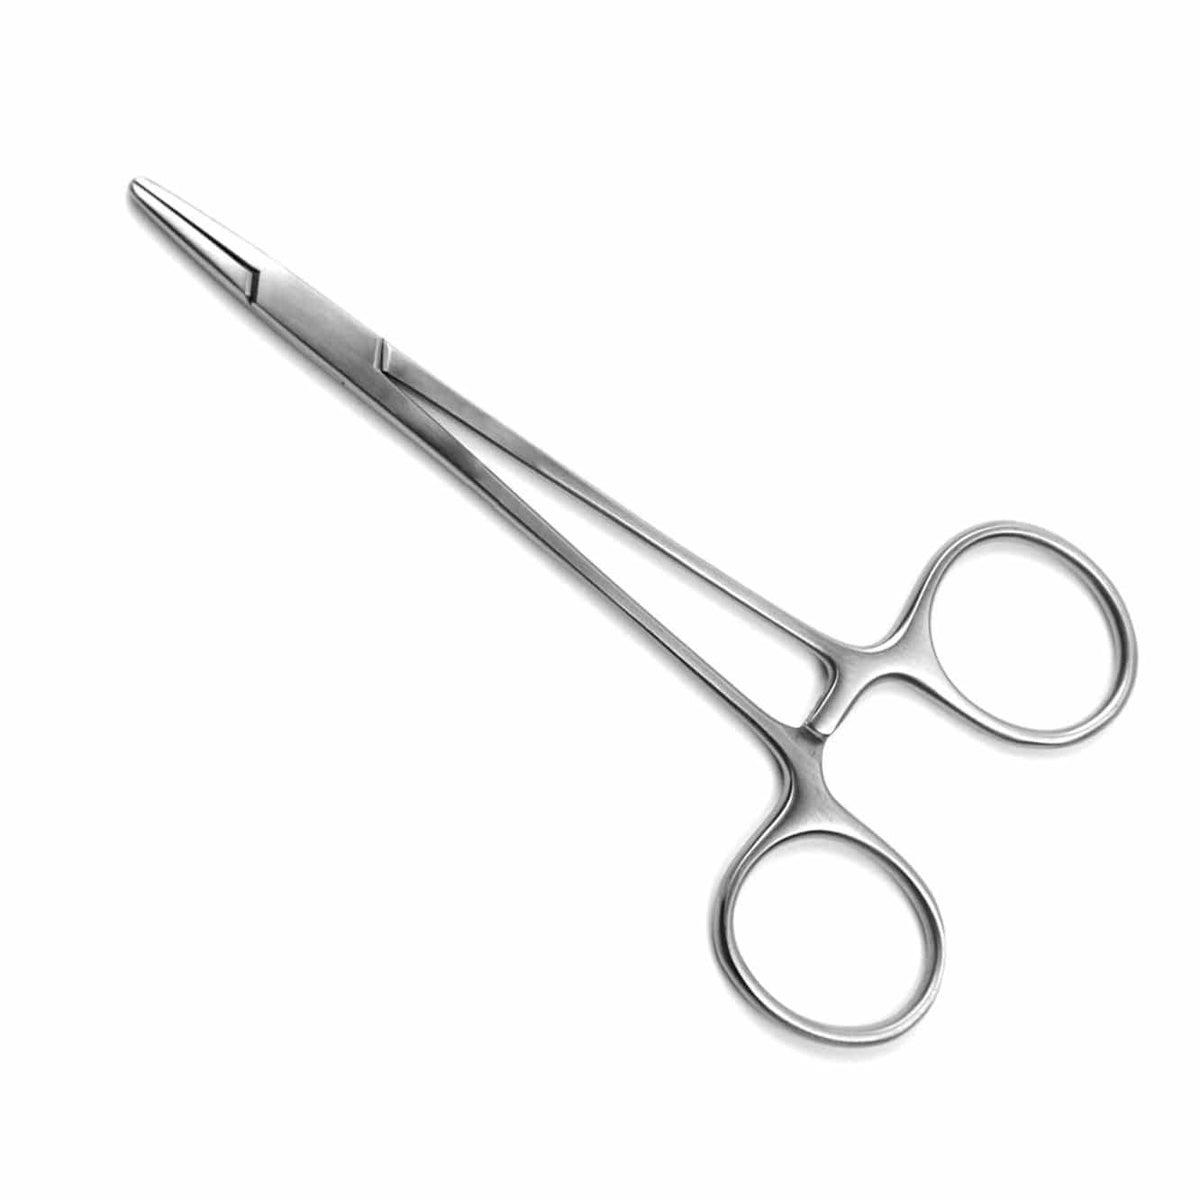 Armo Surgical Instruments Armo Halsey Needle Holder